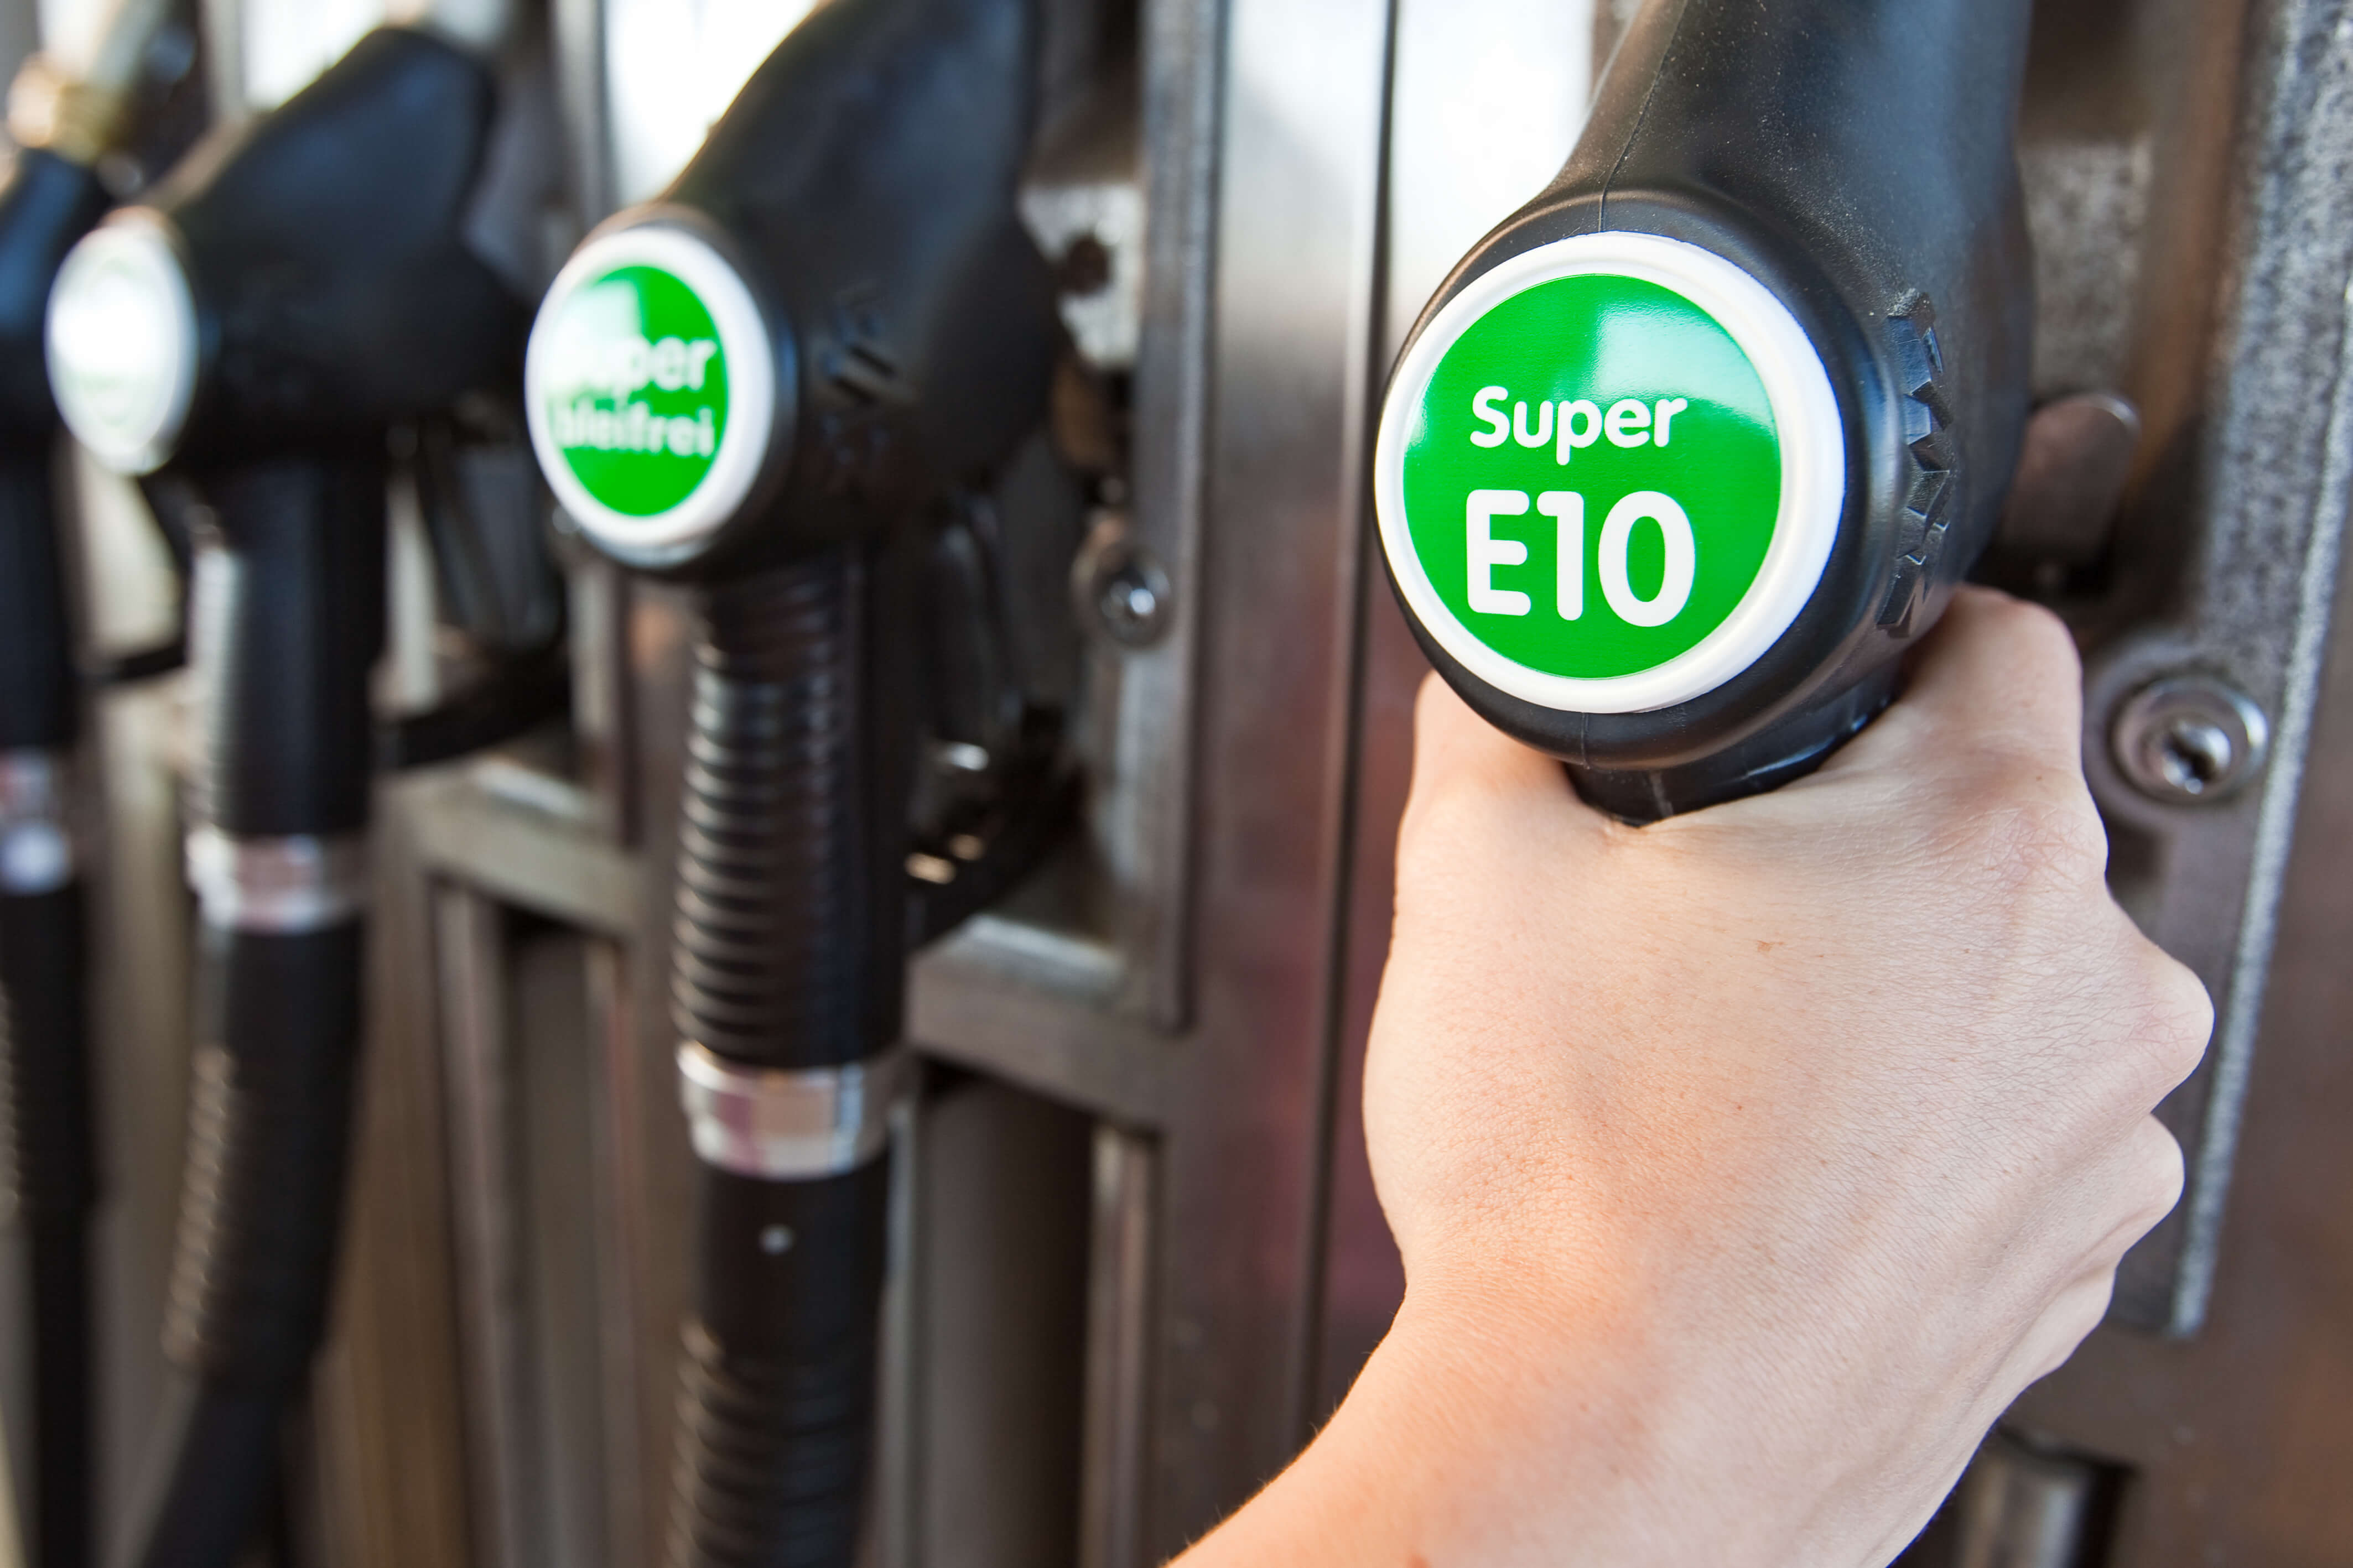 Why is there Ethanol in Gasoline?